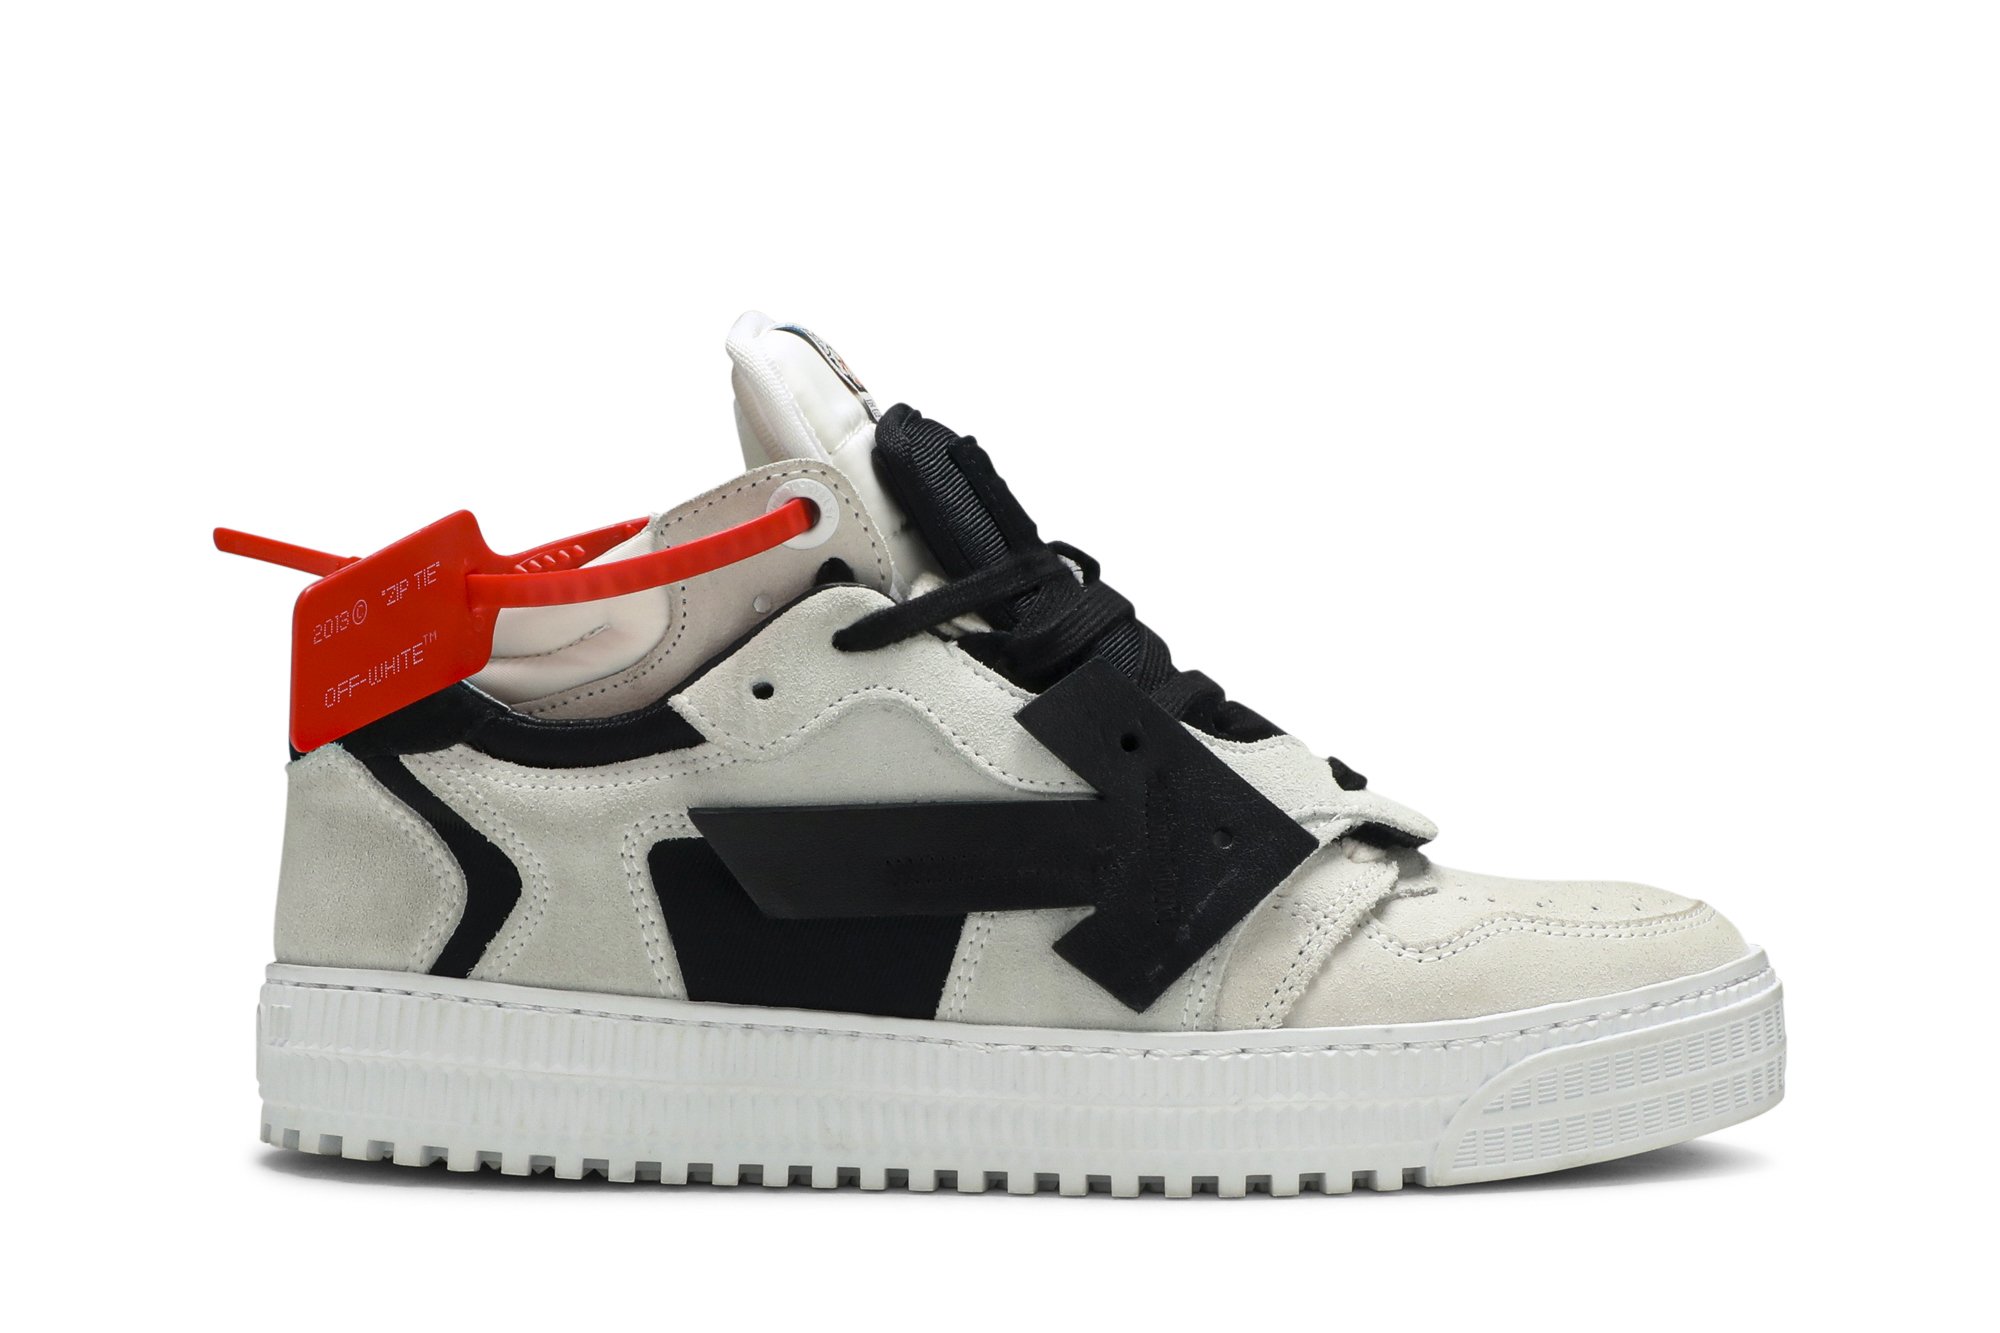 Buy Off-White Off-Court 'Beige Black' - OMIA151R20D38059 4810 | GOAT